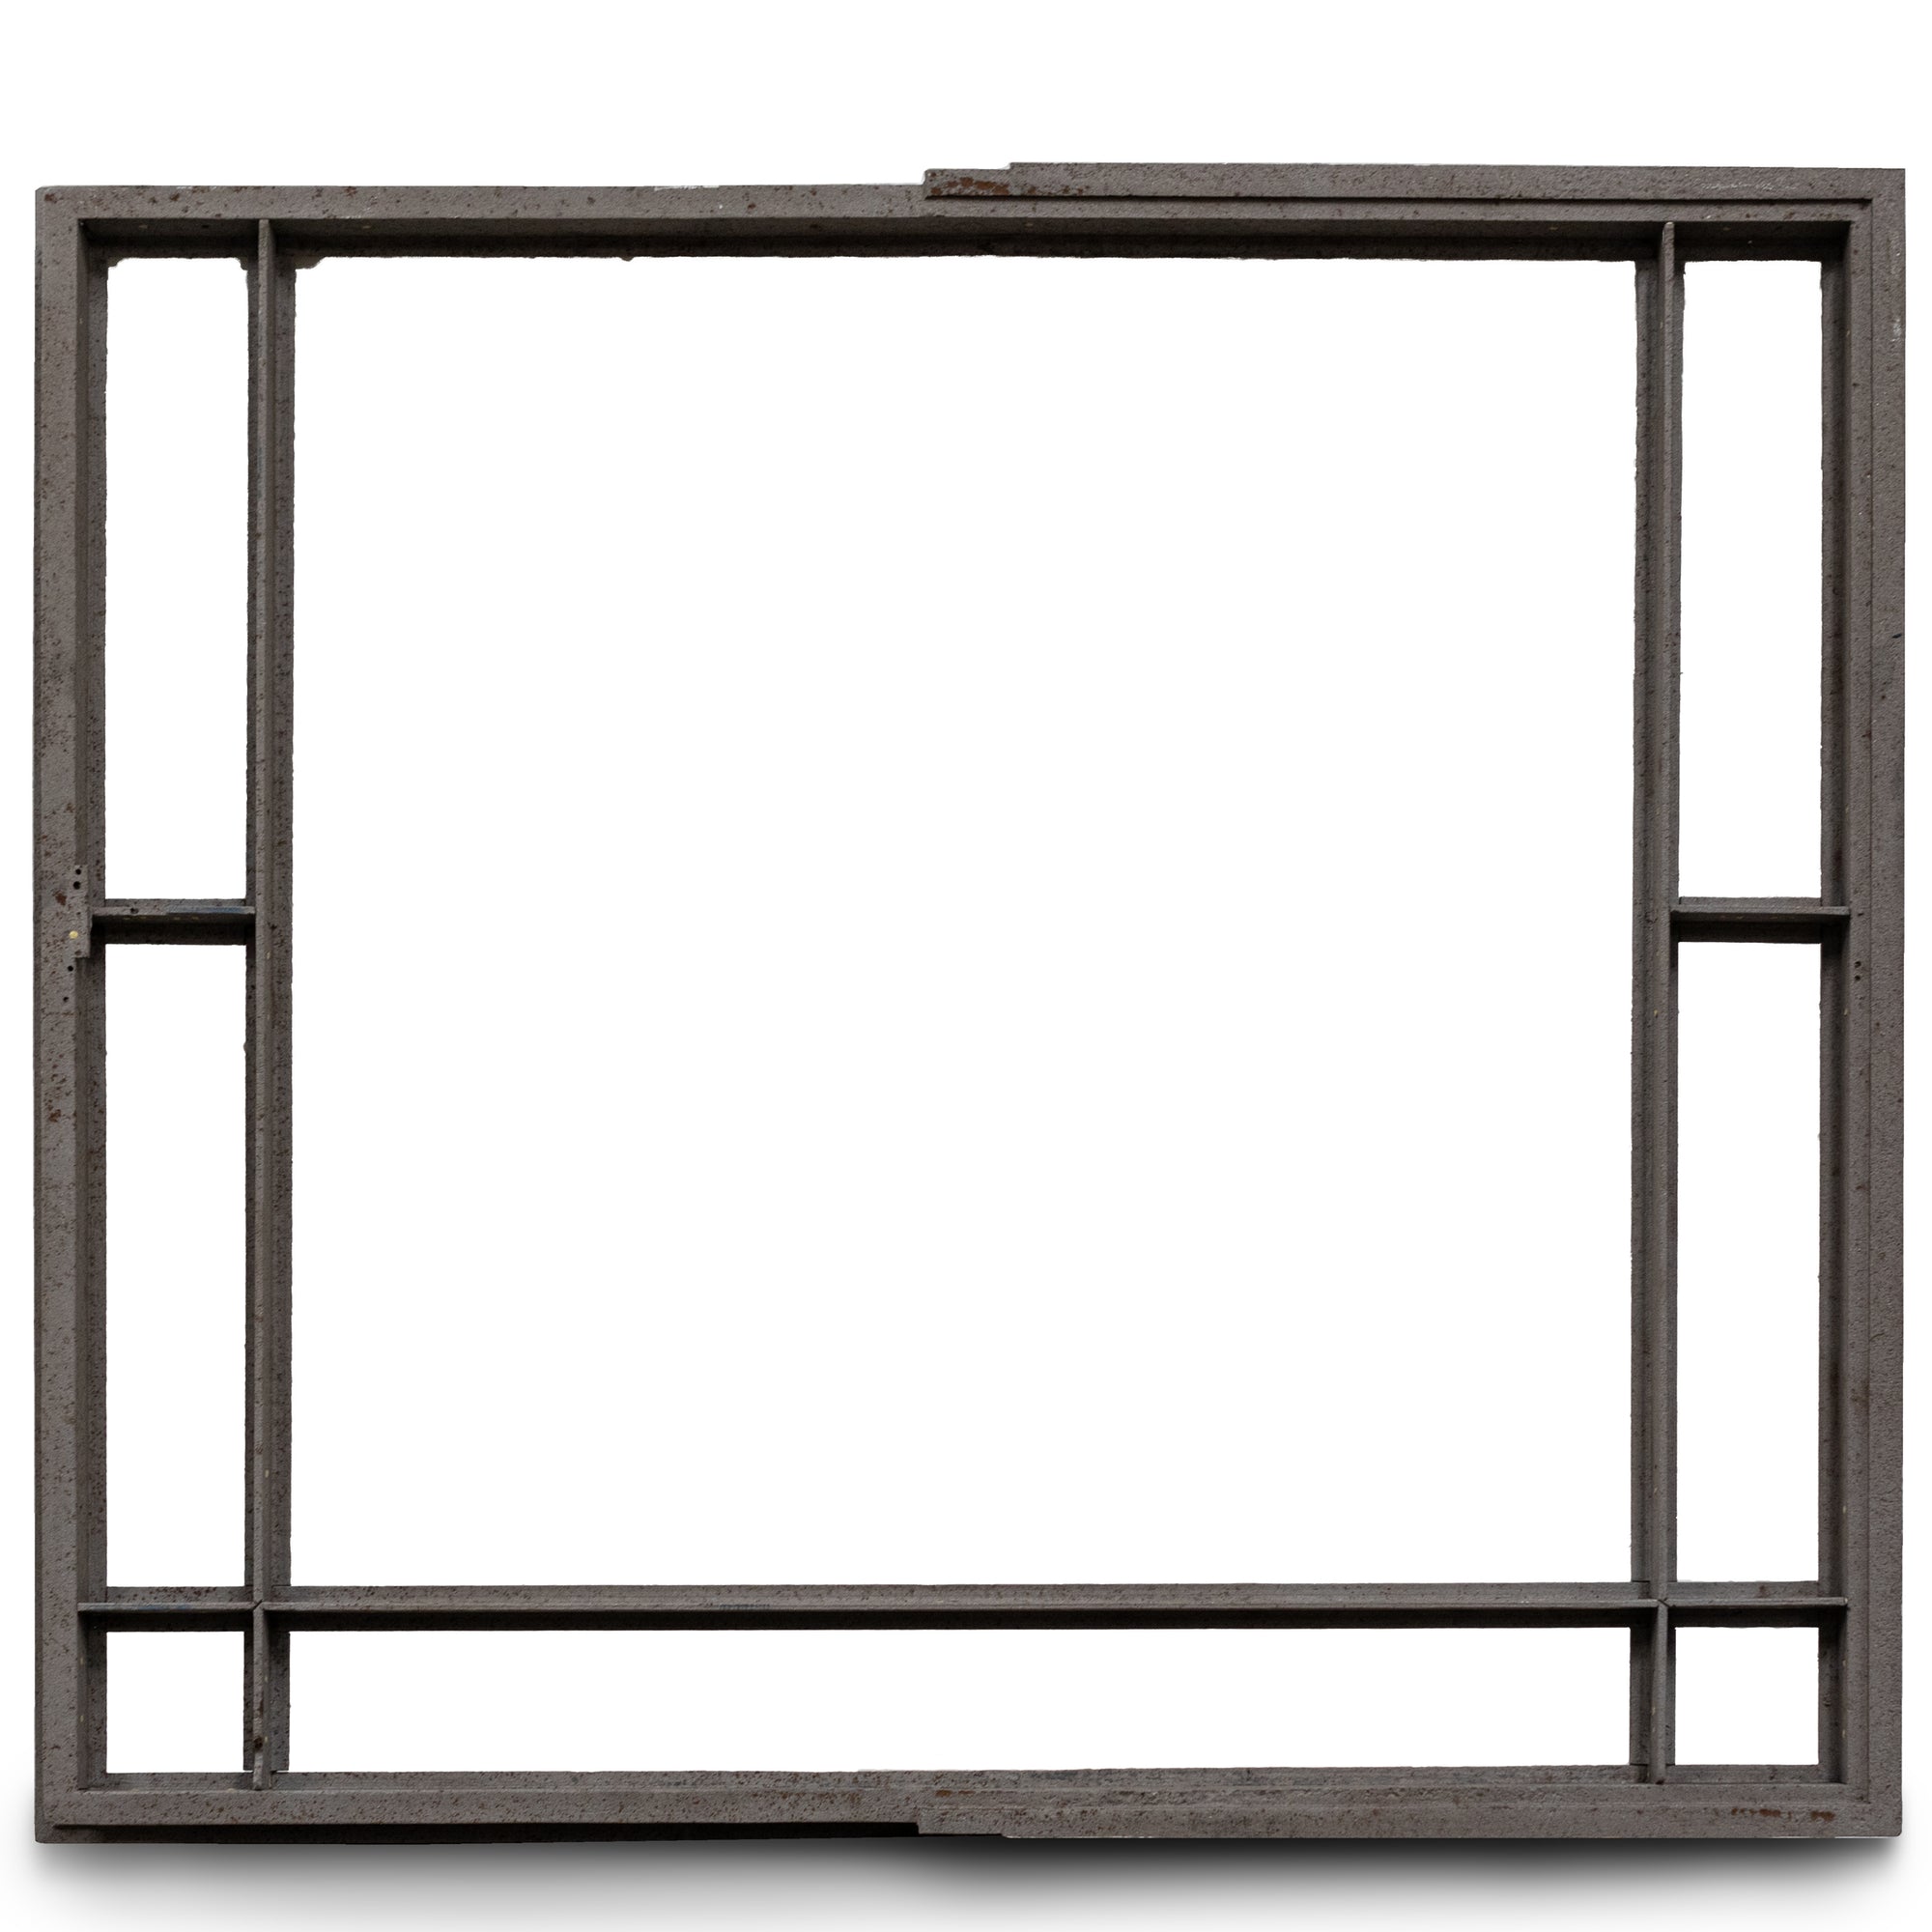 Antique Crittall Sqaure & Rectangular Panels (6 Available) | The Architectural Forum